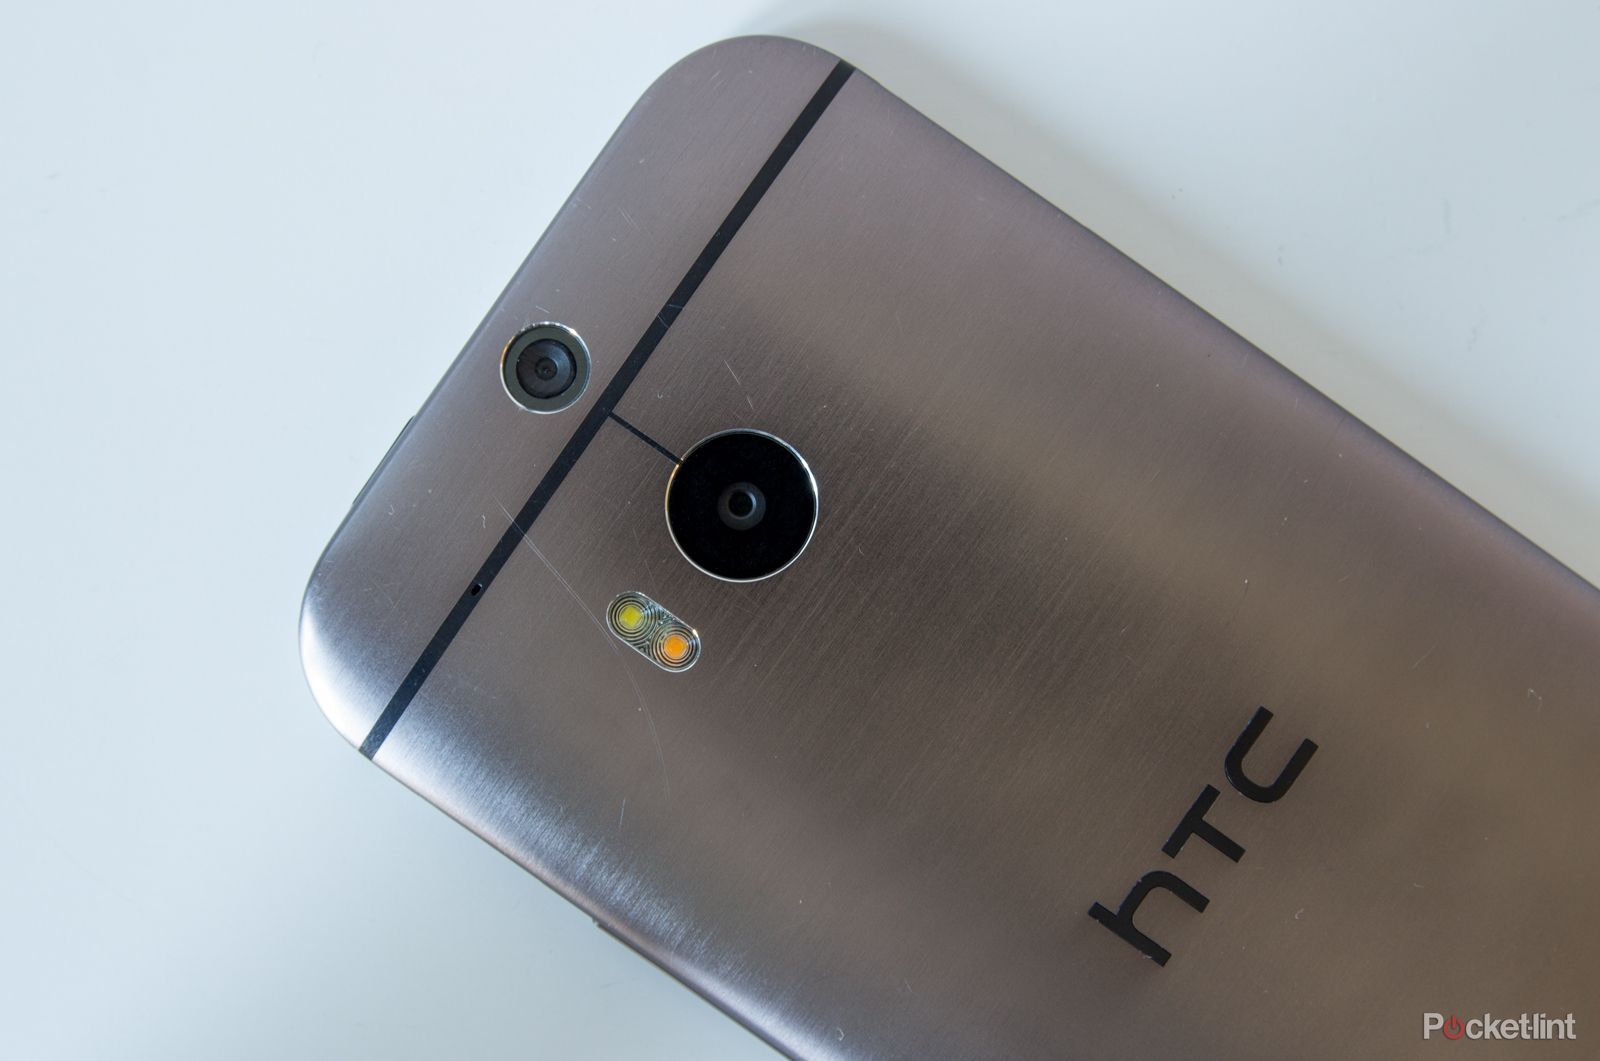 htc one m9 gets most official leak yet right on the htc website image 1